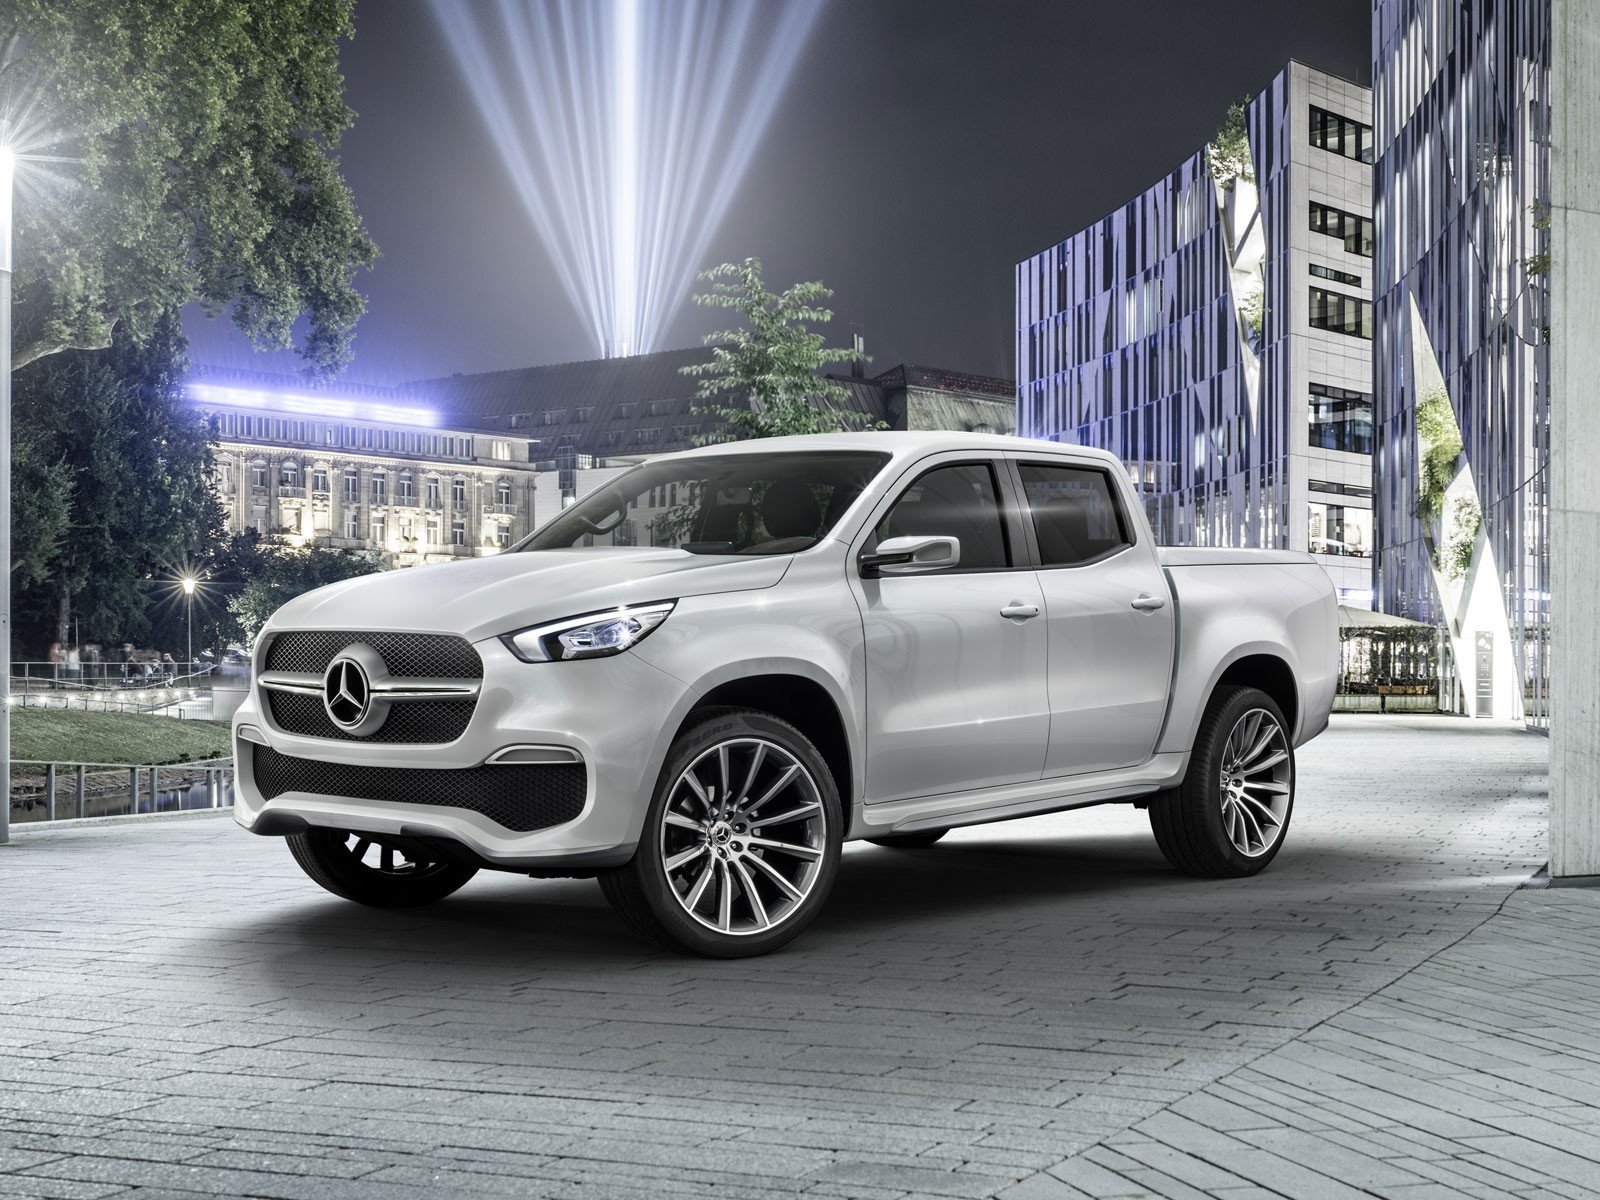 More information about "Mercedes X-Class pickup"